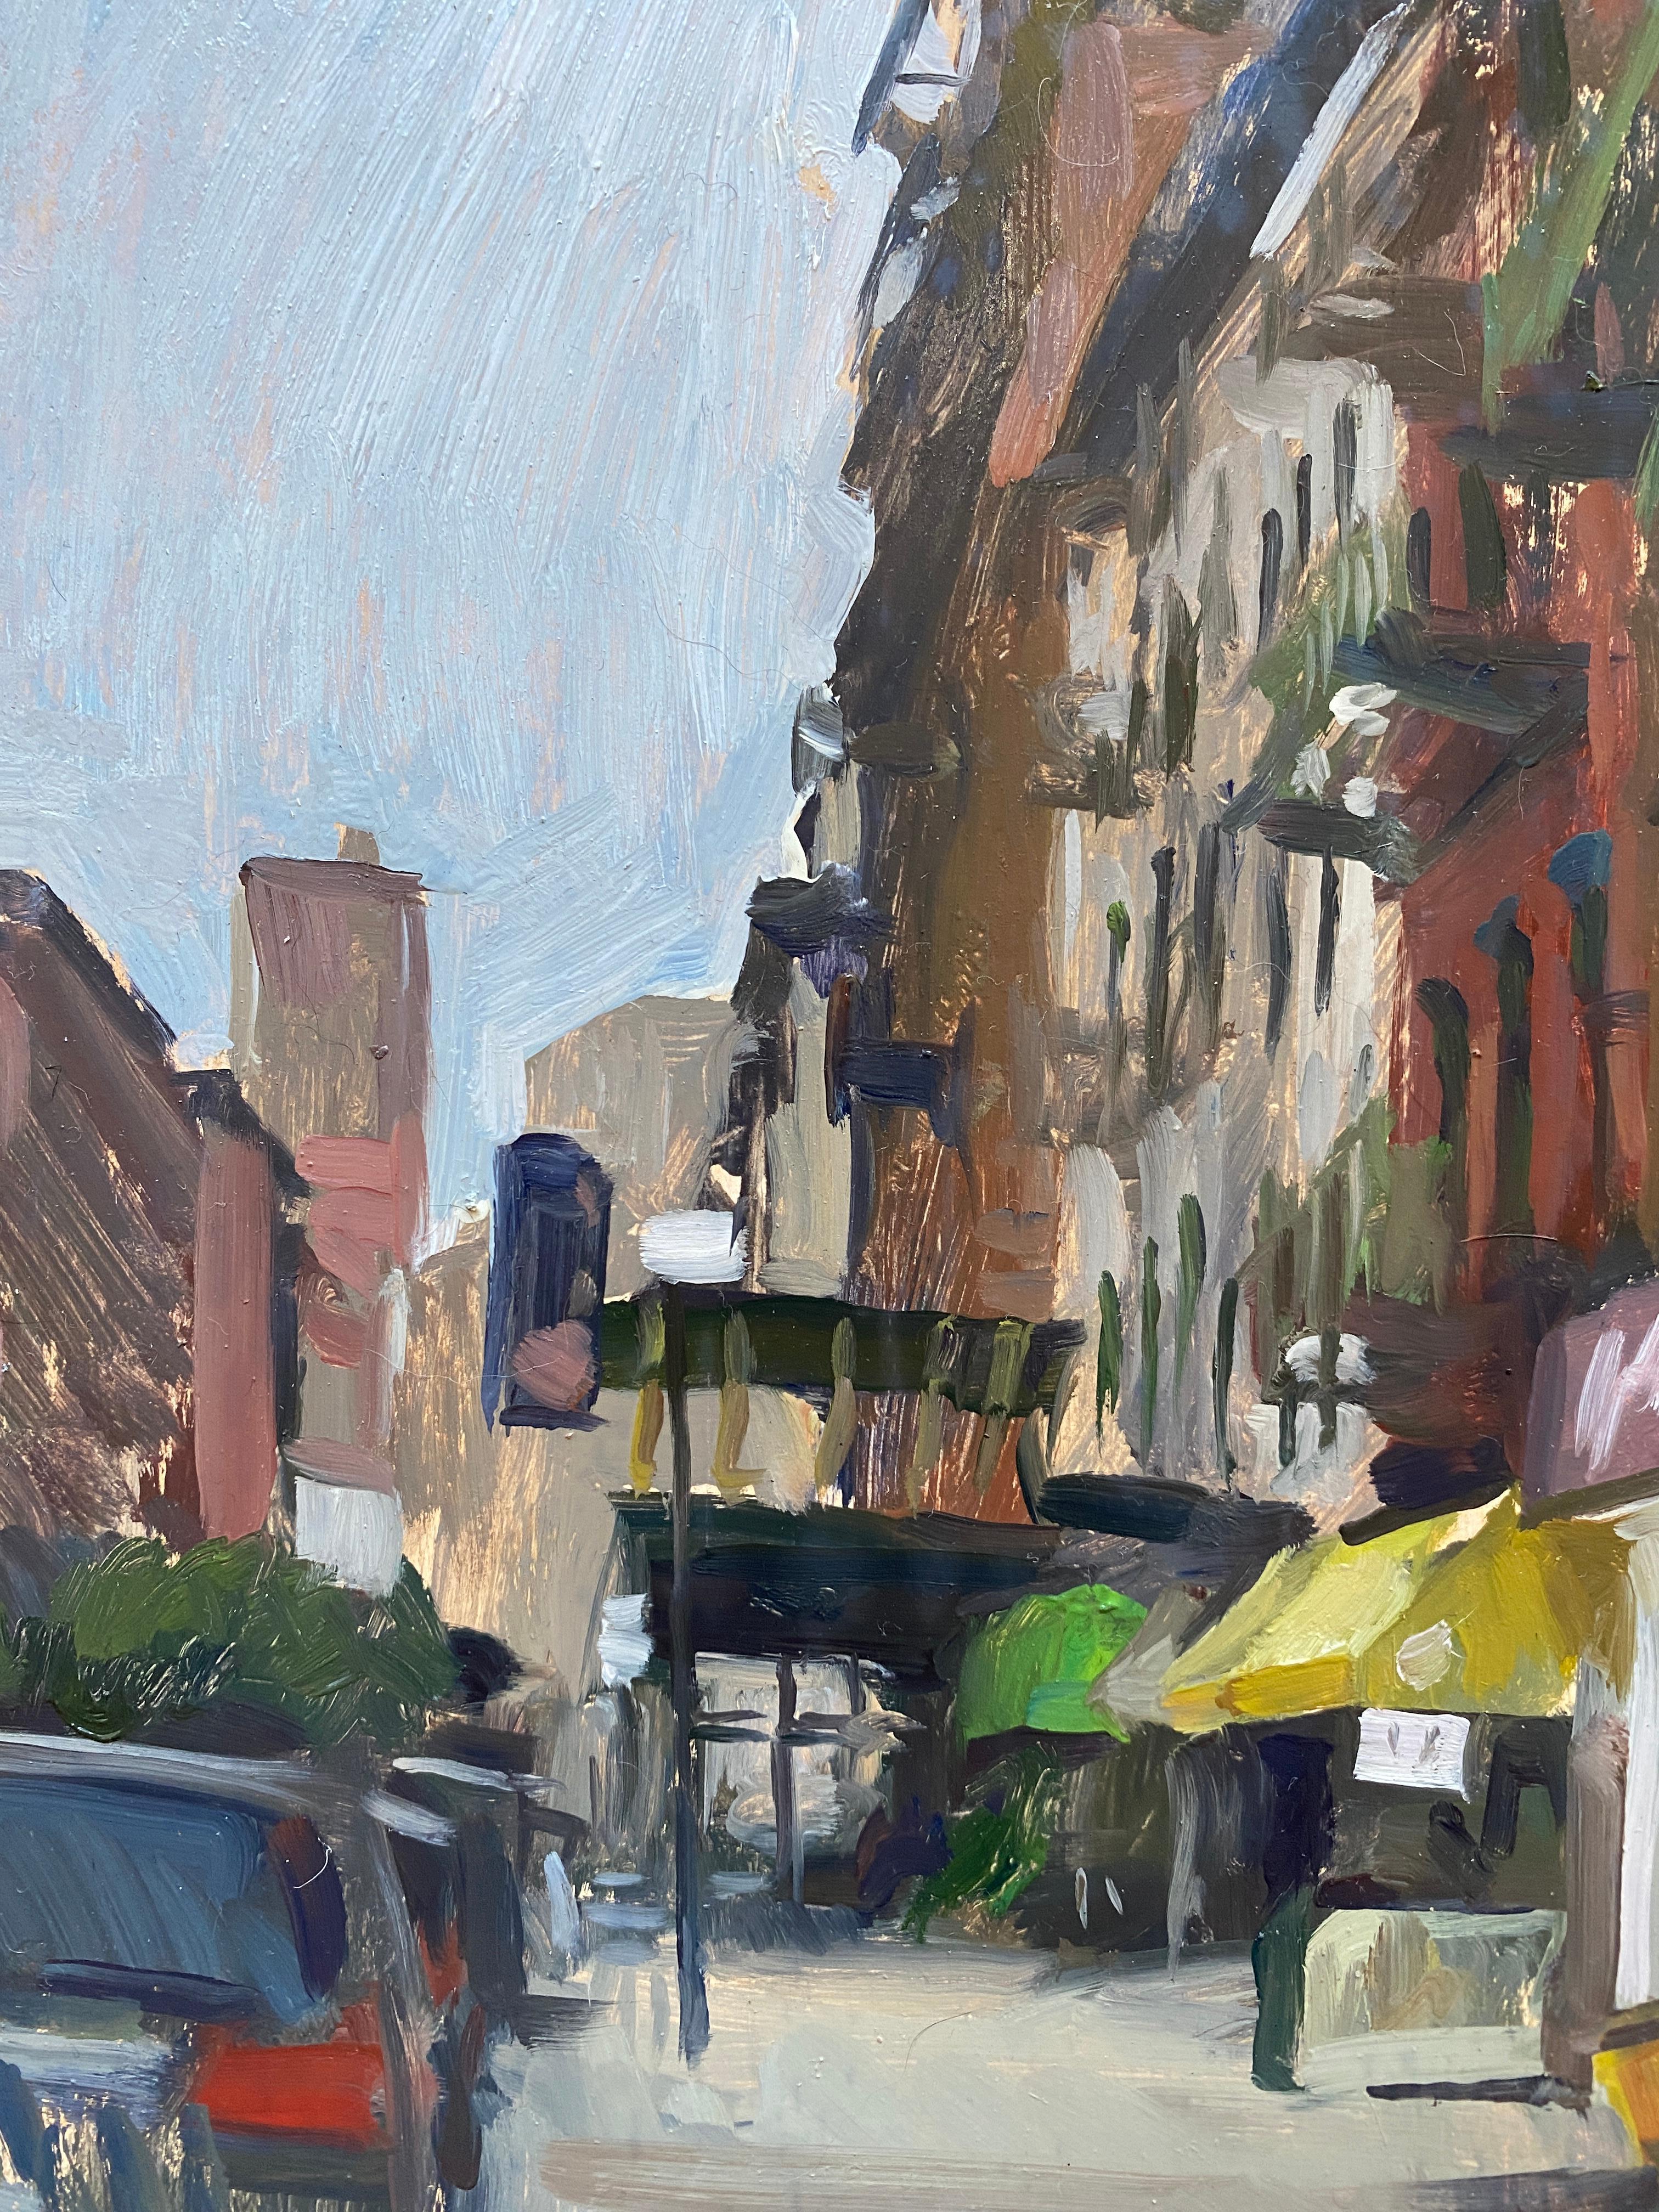 Centre Street, Chinatown, NY - Gray Figurative Painting by Marc Dalessio